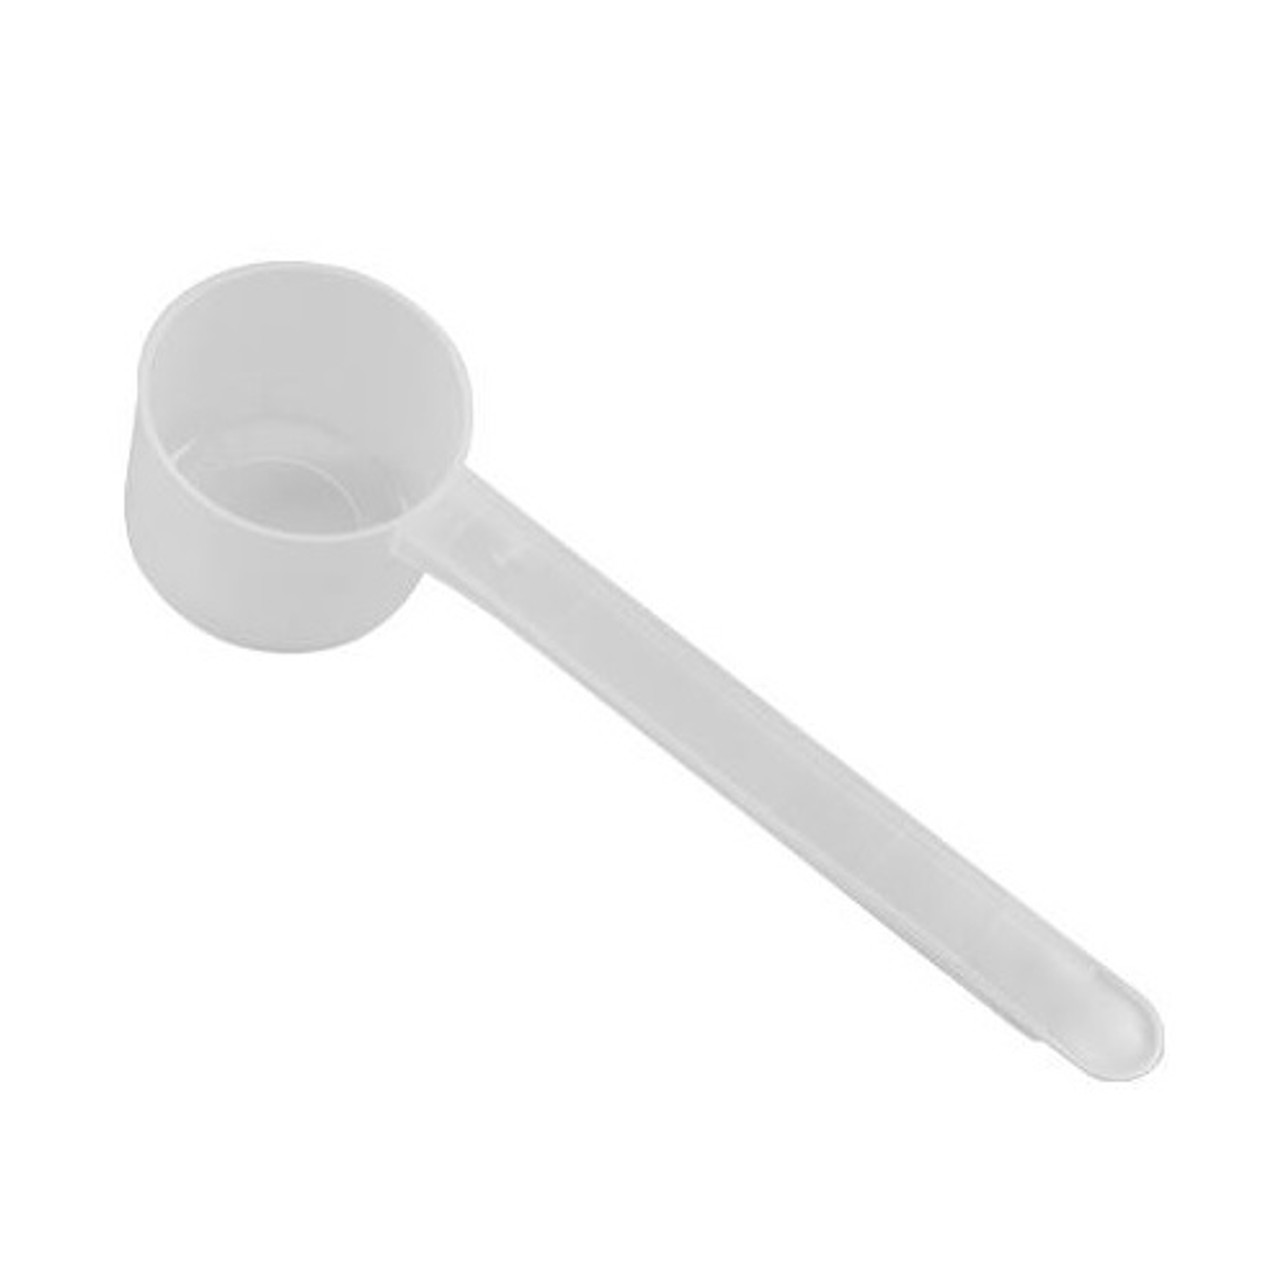 1 Teaspoon (1/3 Tablespoon | 5 ml) Long Handle Scoop for Measuring Coffee, Pet Food, Grains, Protein, Spices and Other Dry Goods (Pack of 1)